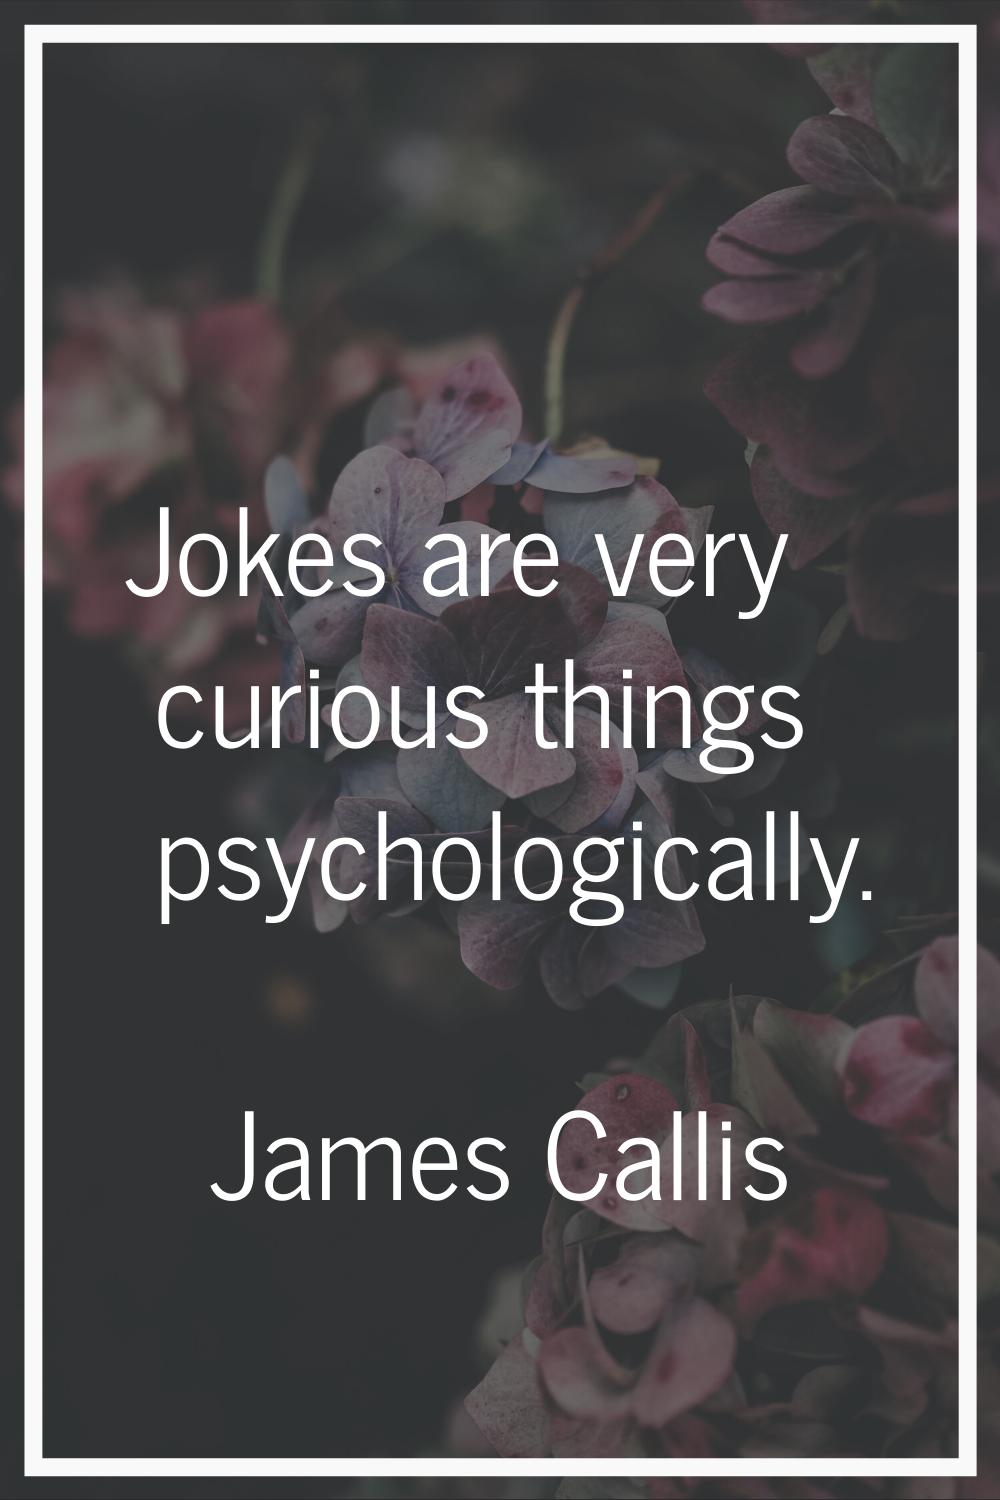 Jokes are very curious things psychologically.